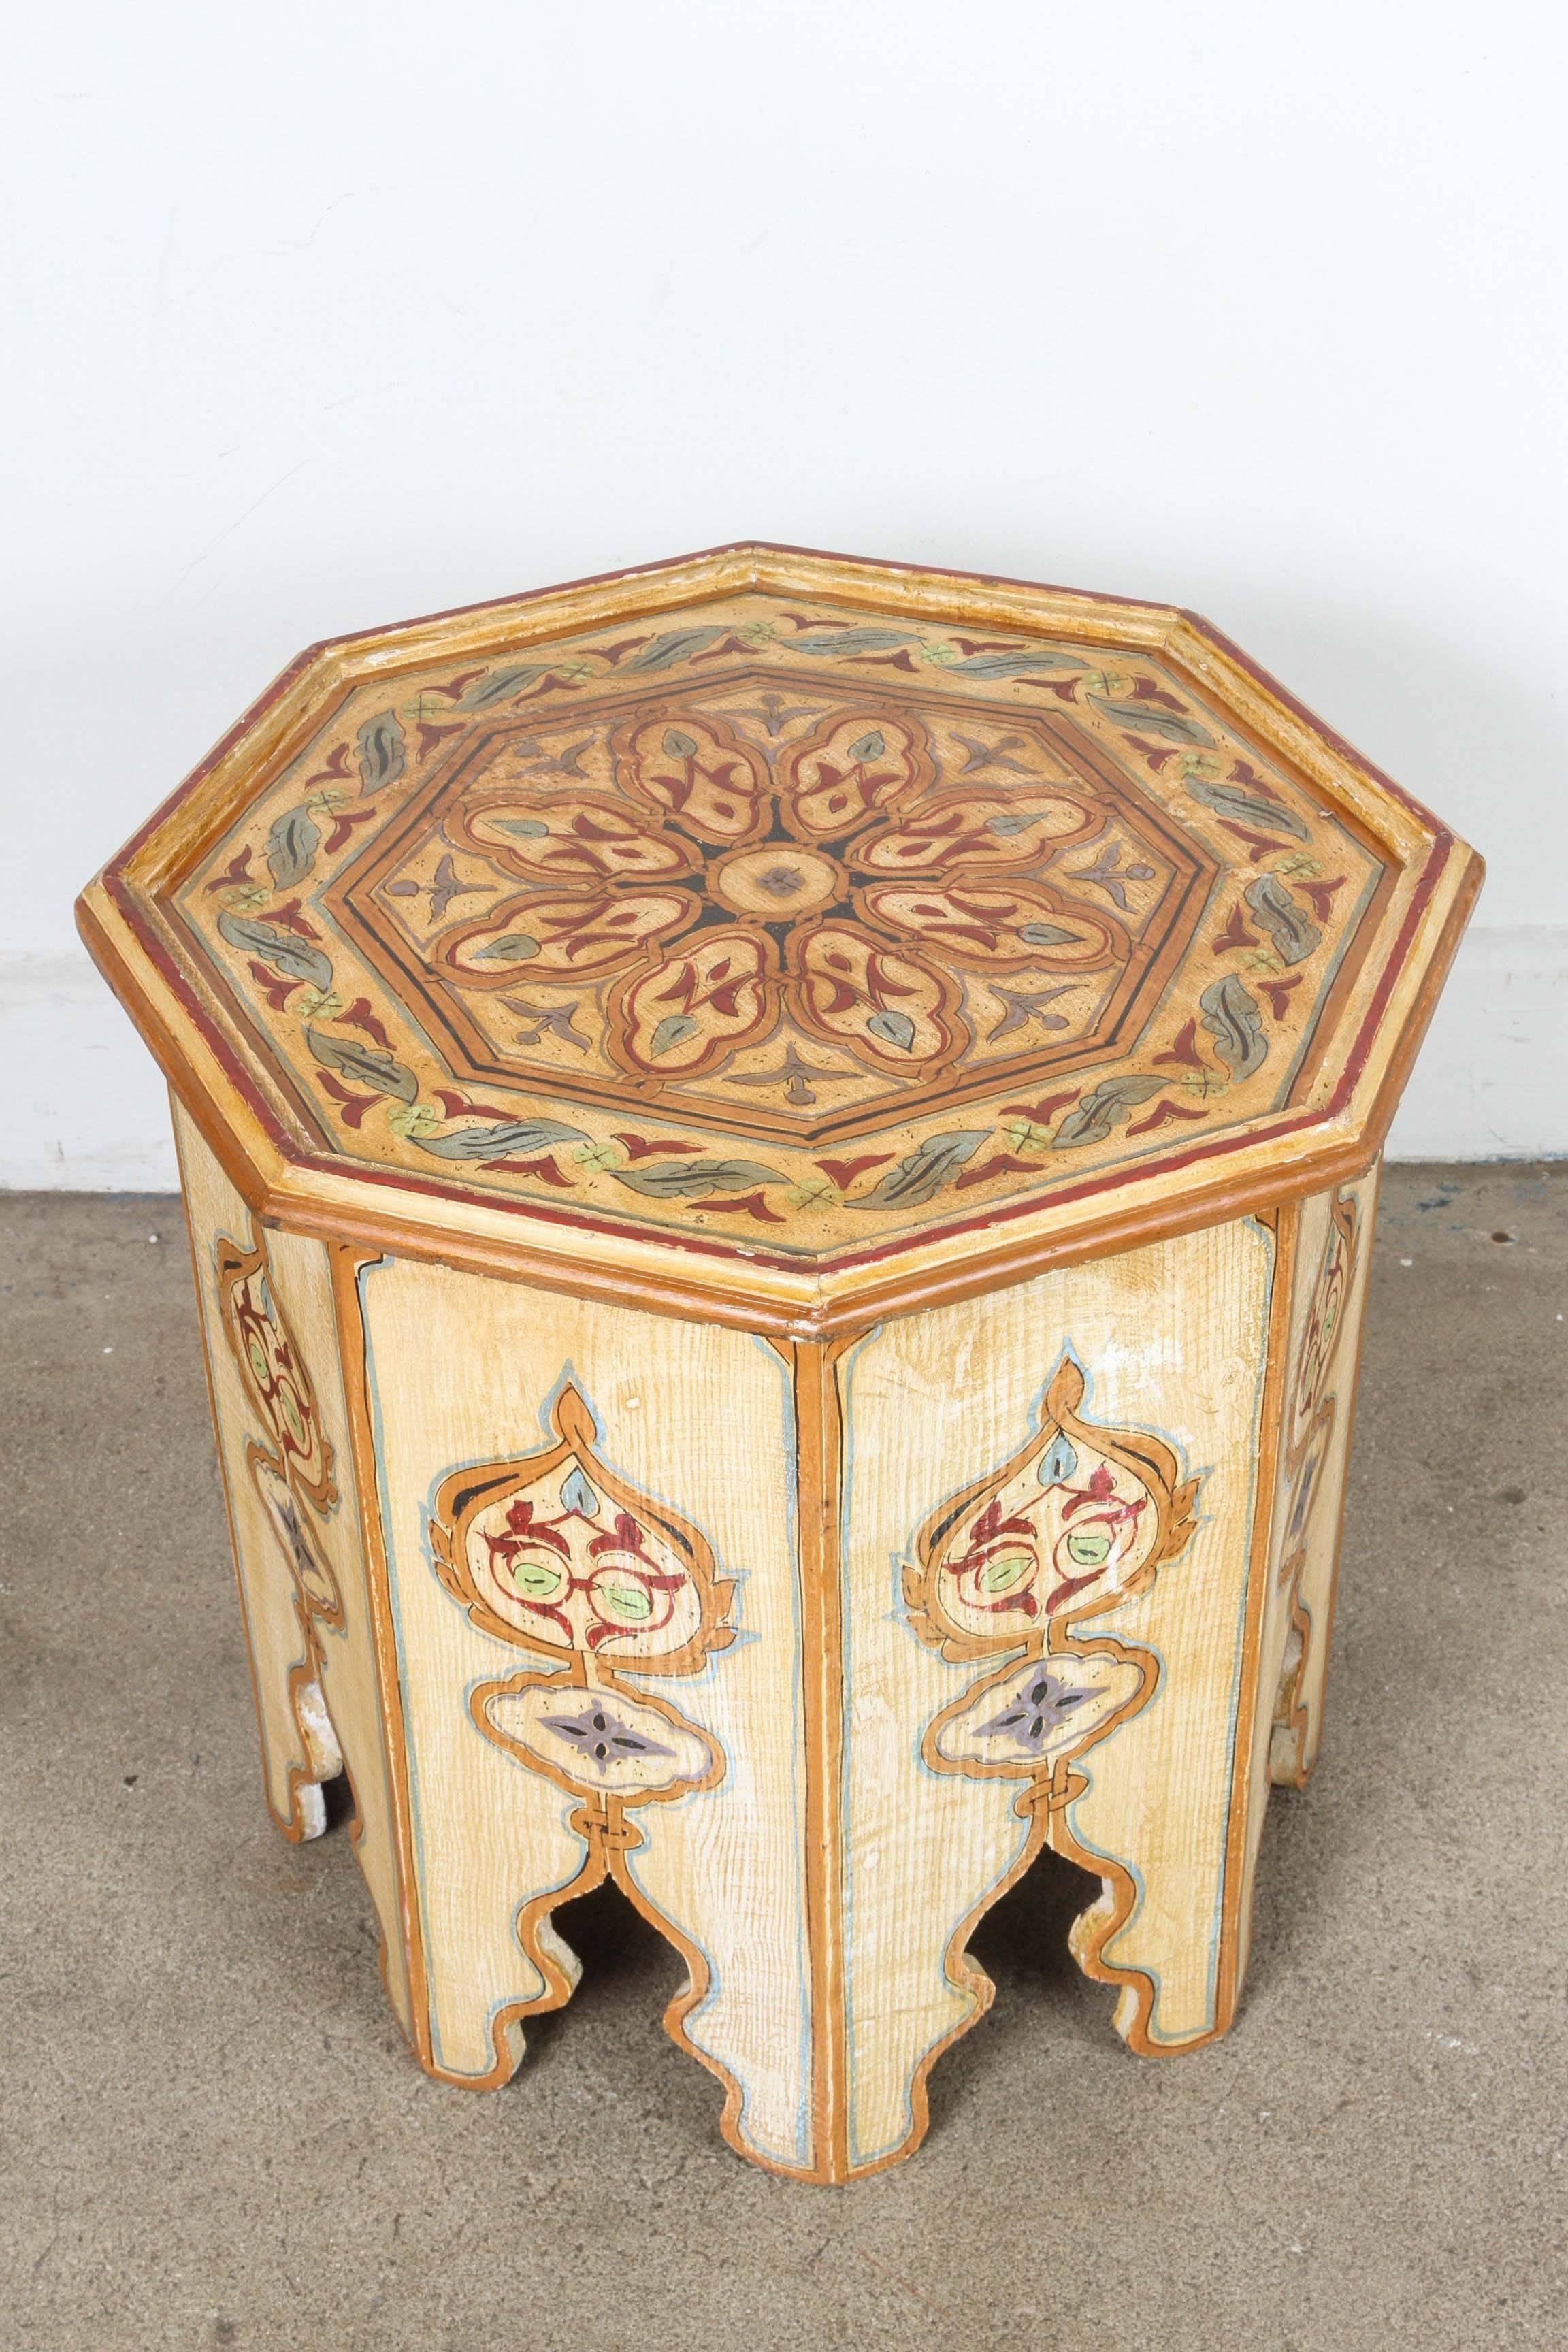 Moroccan Ivory Hand-Painted Side Table with Moorish Design 1